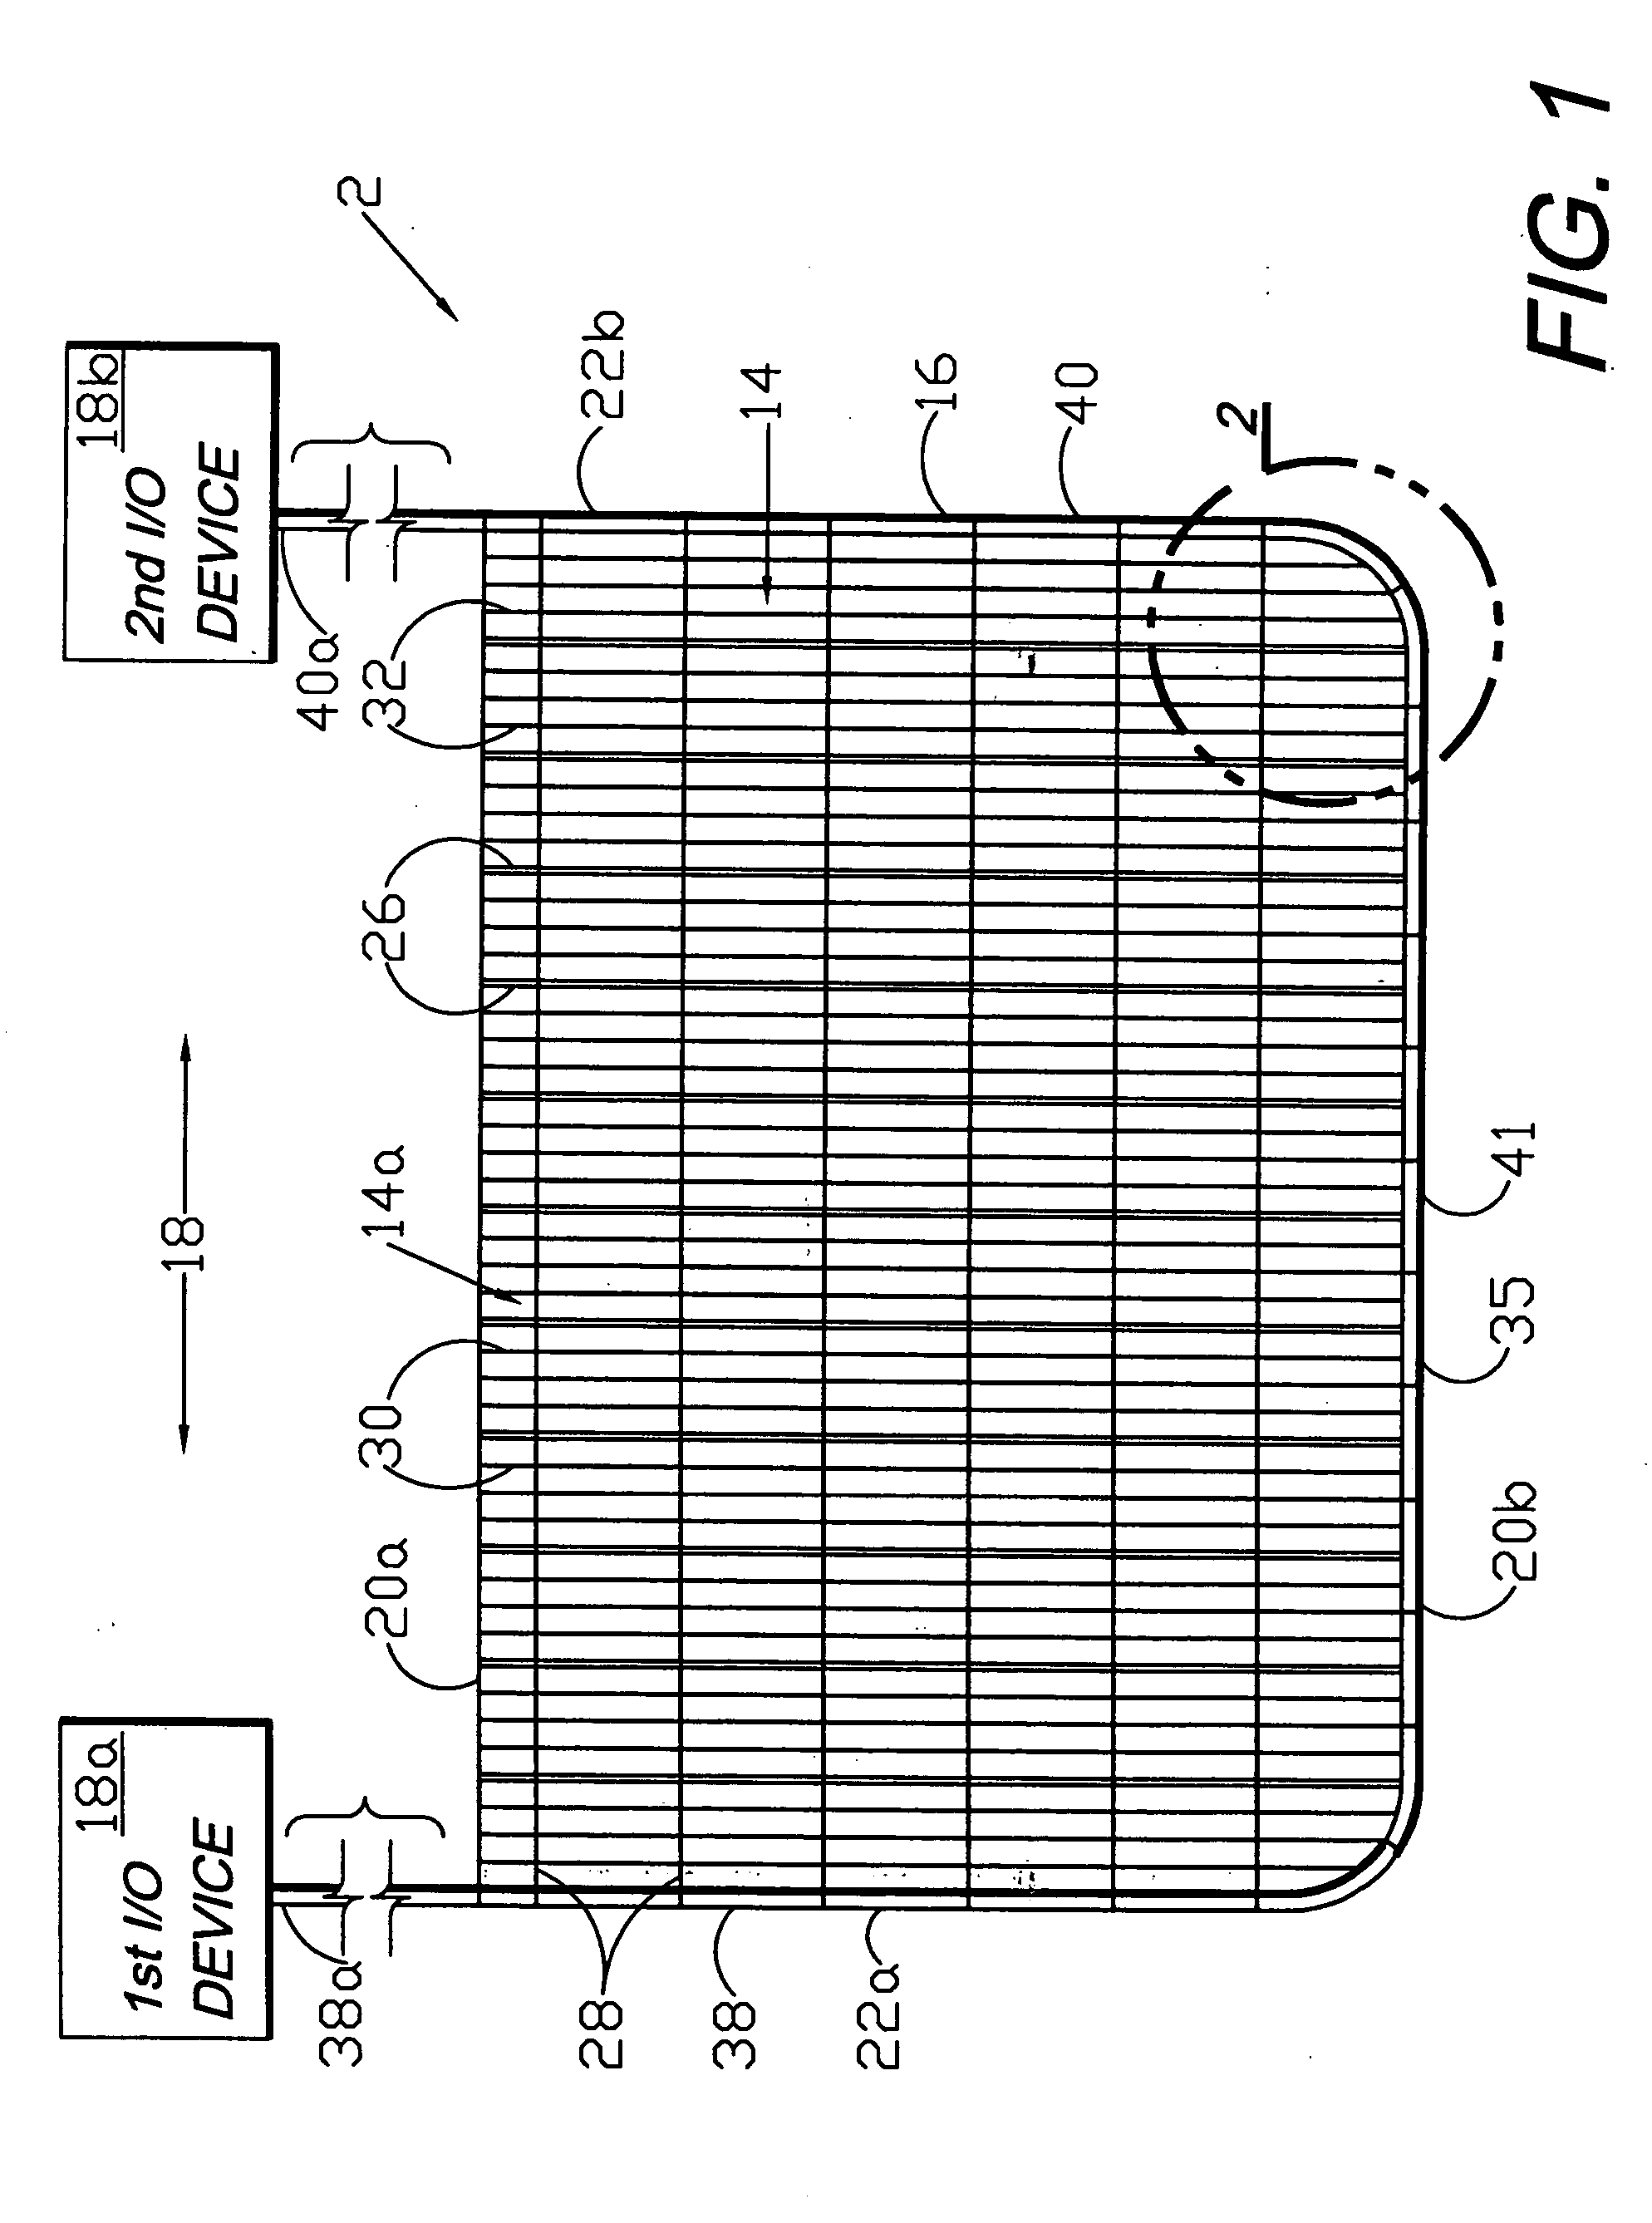 Medical closure screen installation systems and methods